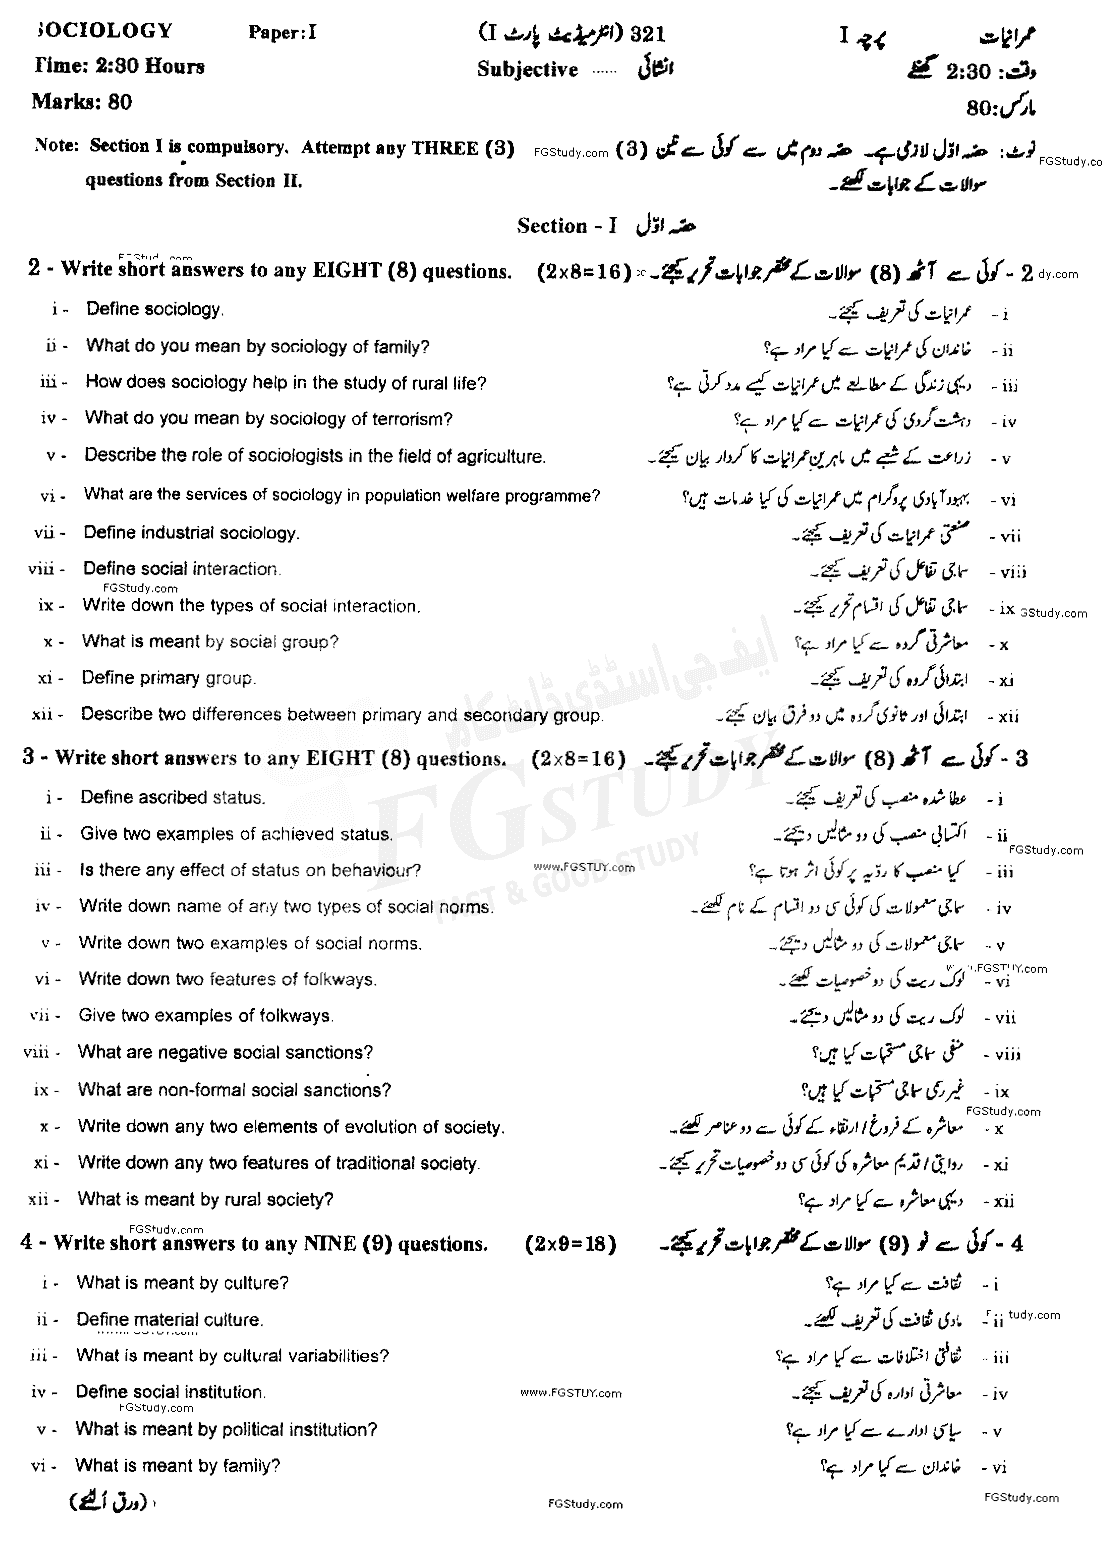 11th Class Sociology Past Paper 2021 Gujranwala Board Subjective